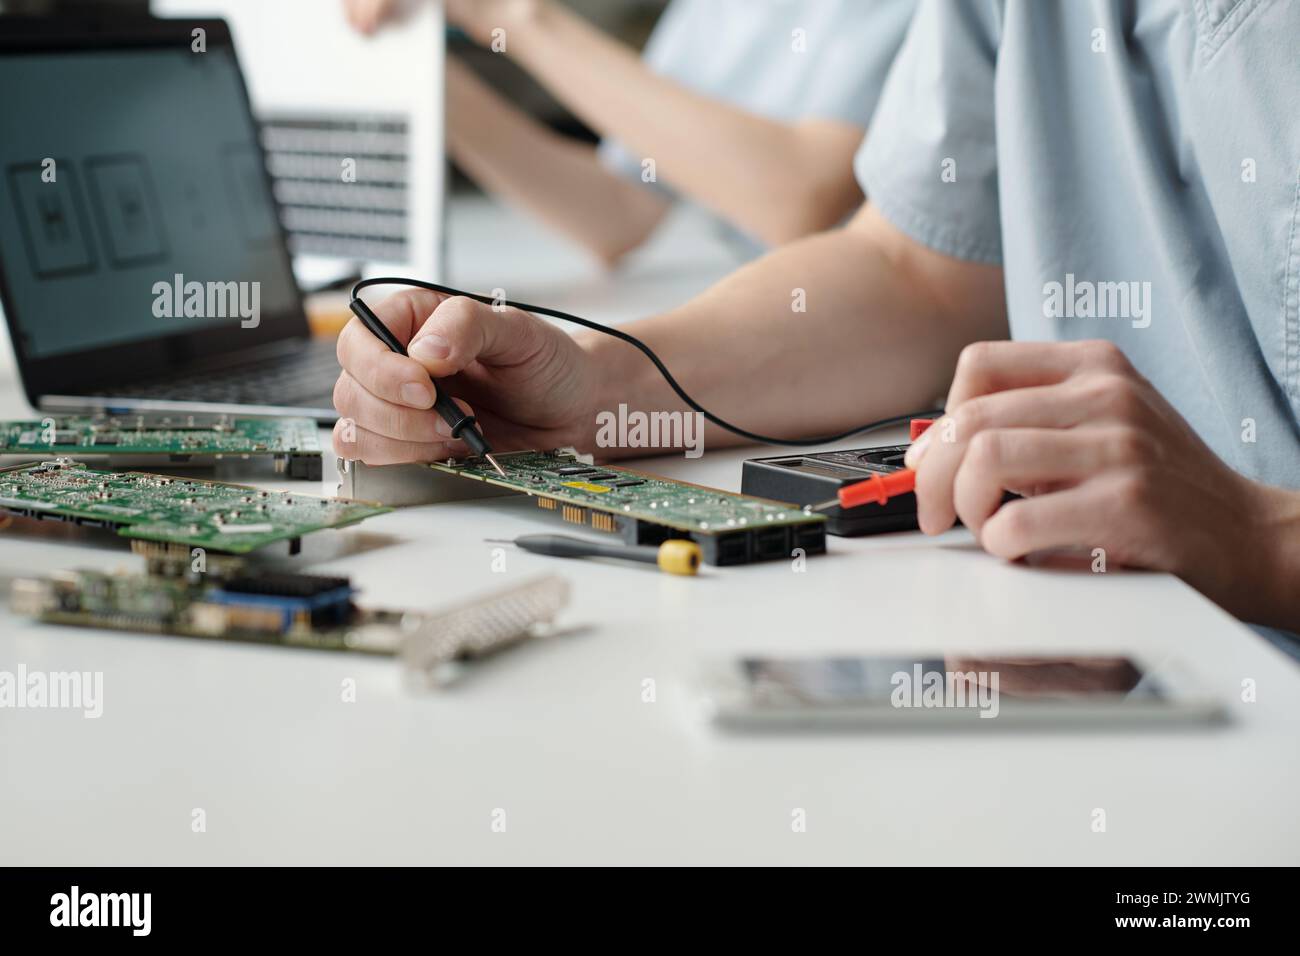 Hands of young worker of troubleshooting service center using electric handtool while checking and repairing computer motherboard Stock Photo